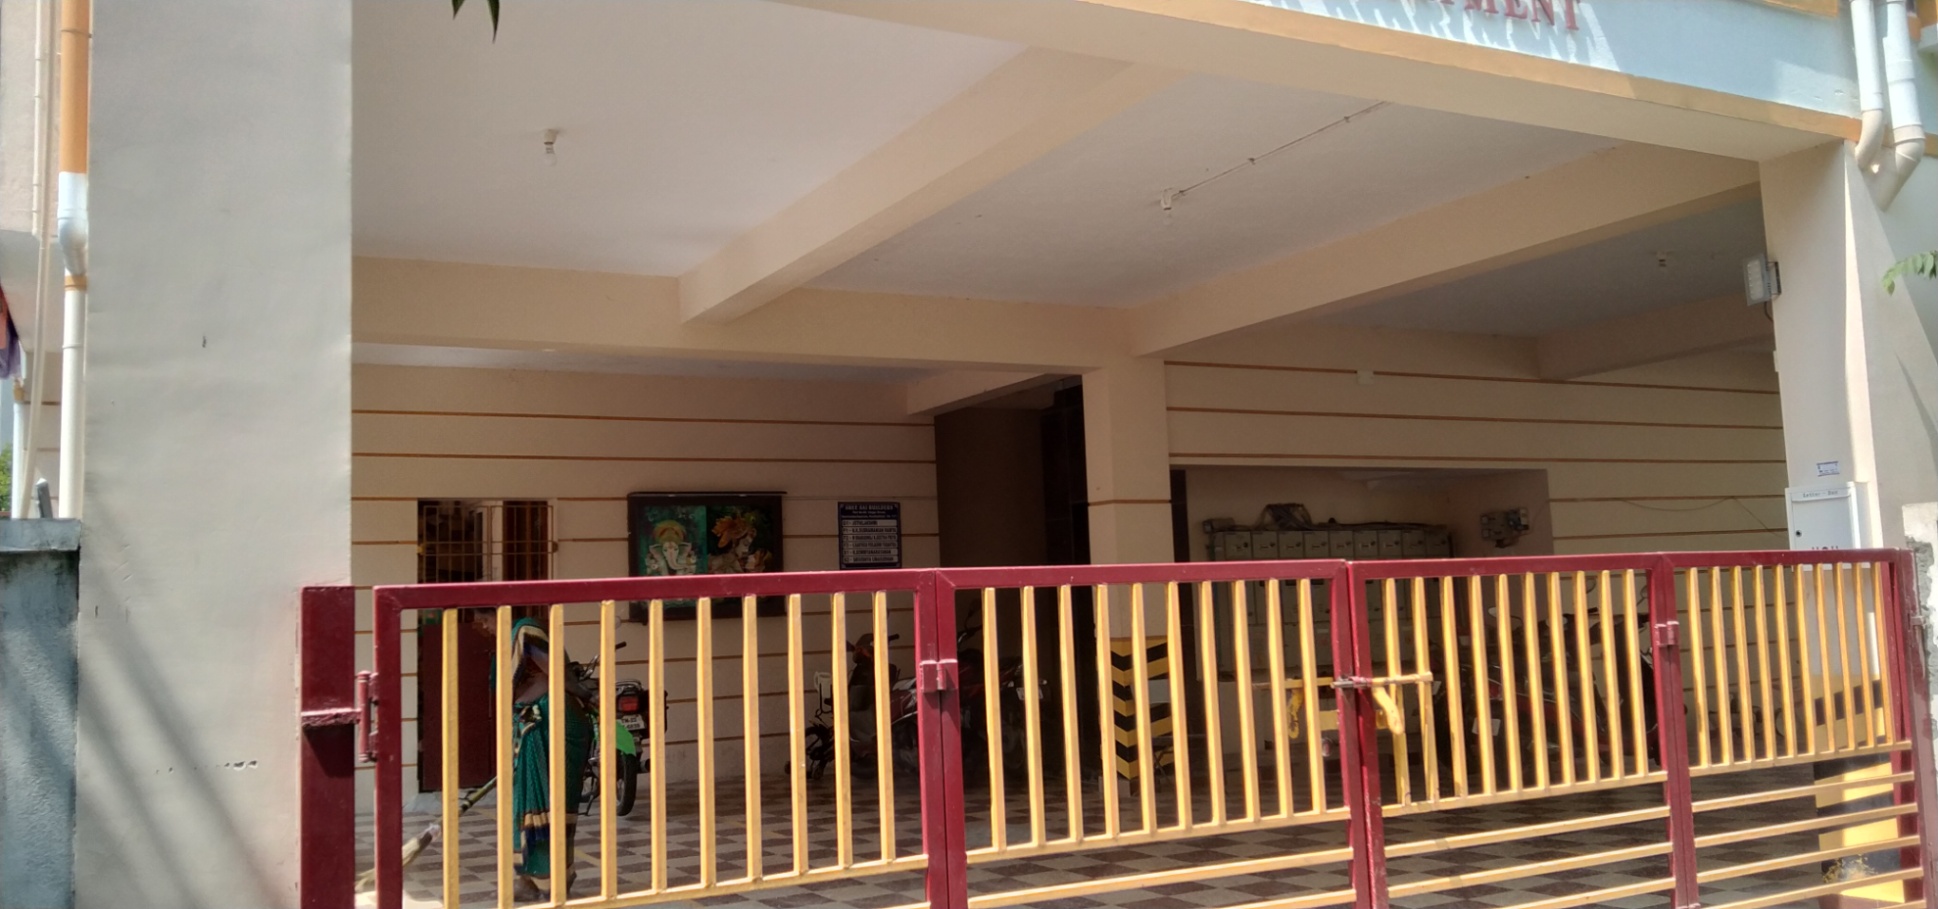 LEASE LEASE LEASE LEASE LEASE LEASE LEASE LEASE  A beautiful newly constructed property 2 bhk with covered car park. AVAILABLE AT KOVILAMBAKKAM DEPOSIT AMOUNT FOR LEASE 10,00,000.00 (10LAKHS)